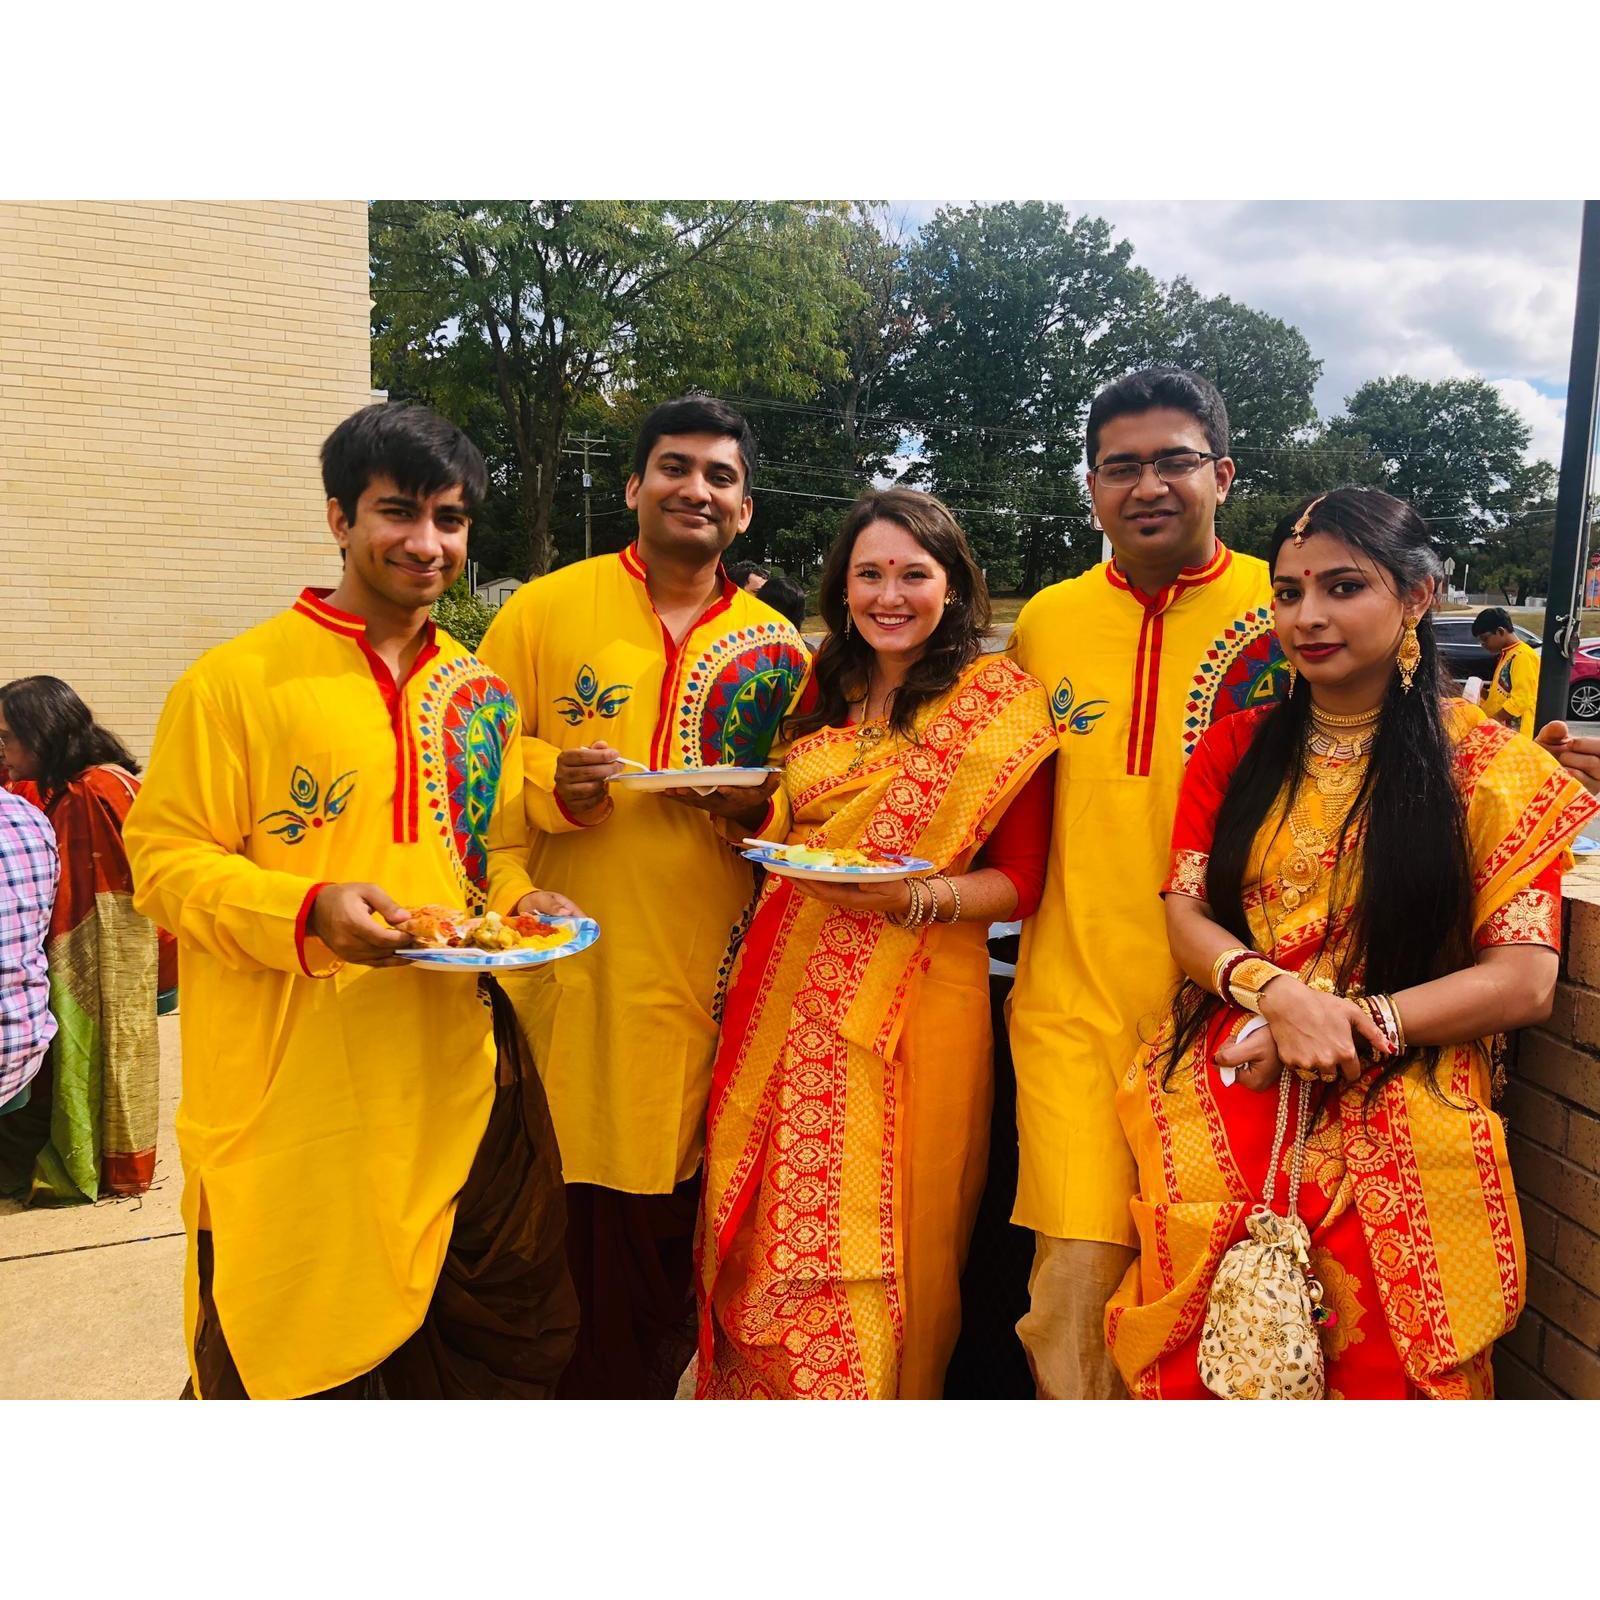 Celebrating Durga Puja with the Ghosh family each October has been a highlight the past few years!